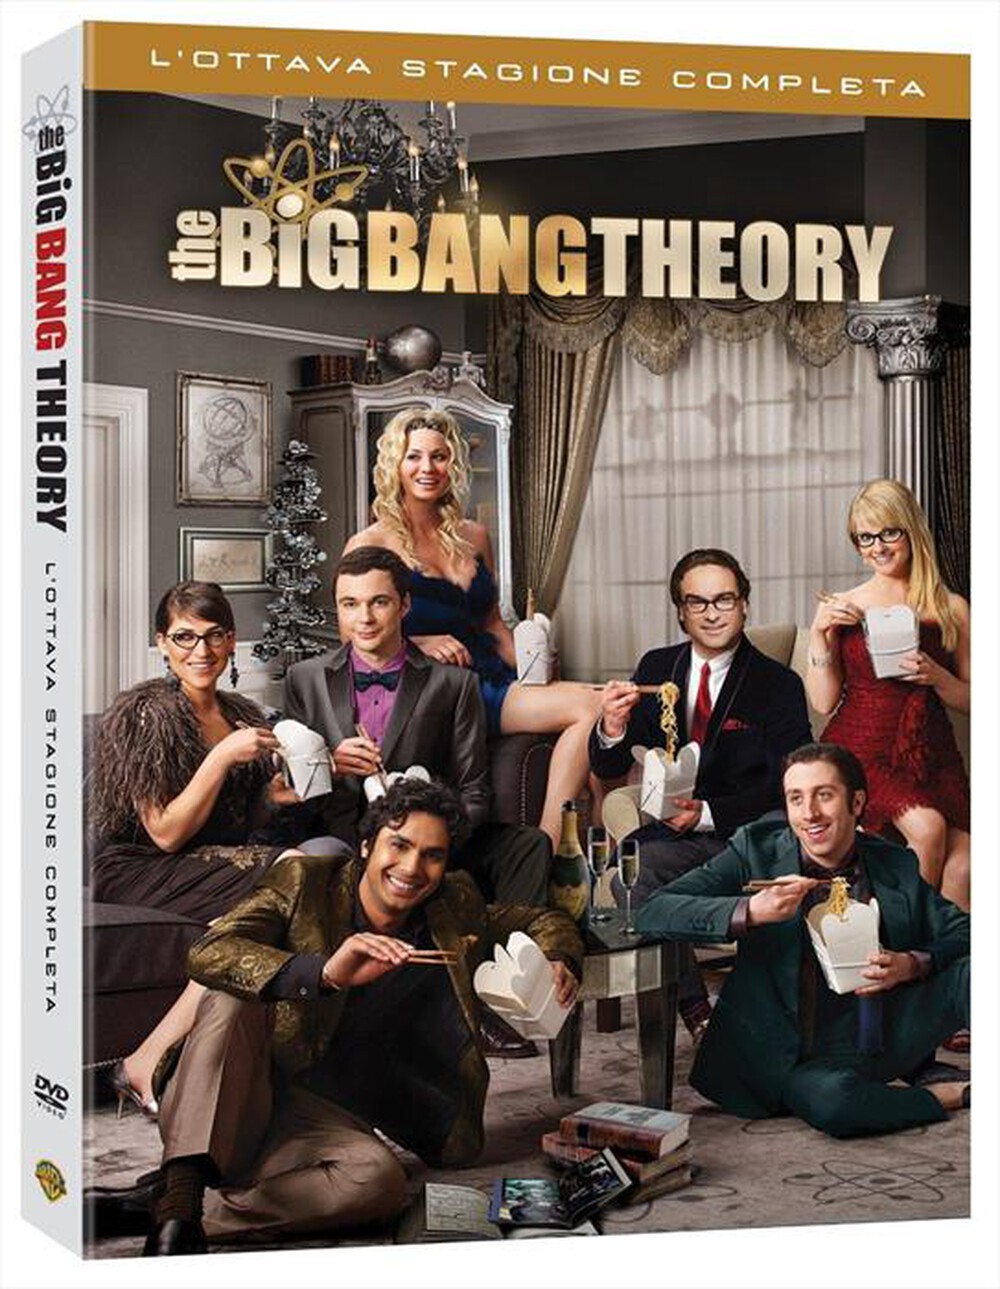 "WARNER HOME VIDEO - Big Bang Theory (The) - Stagione 08 (3 Dvd) - "